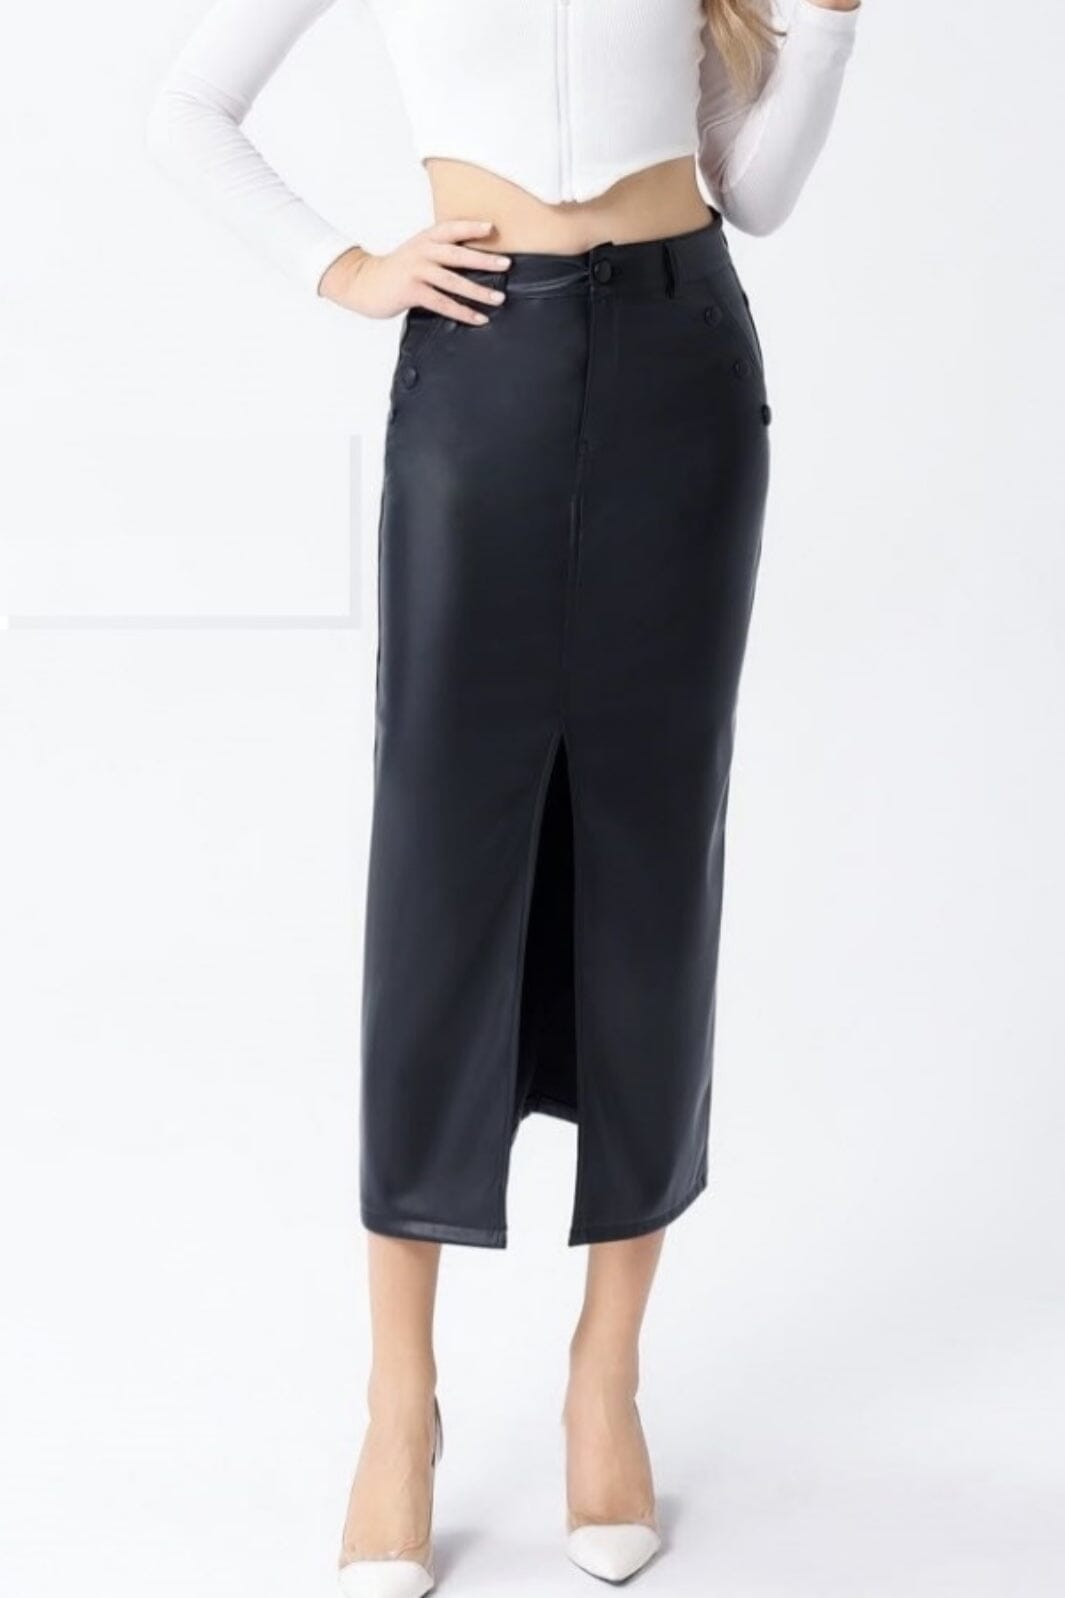 A-bee - Skirt Faux Leather P805 - Black Nederdele 